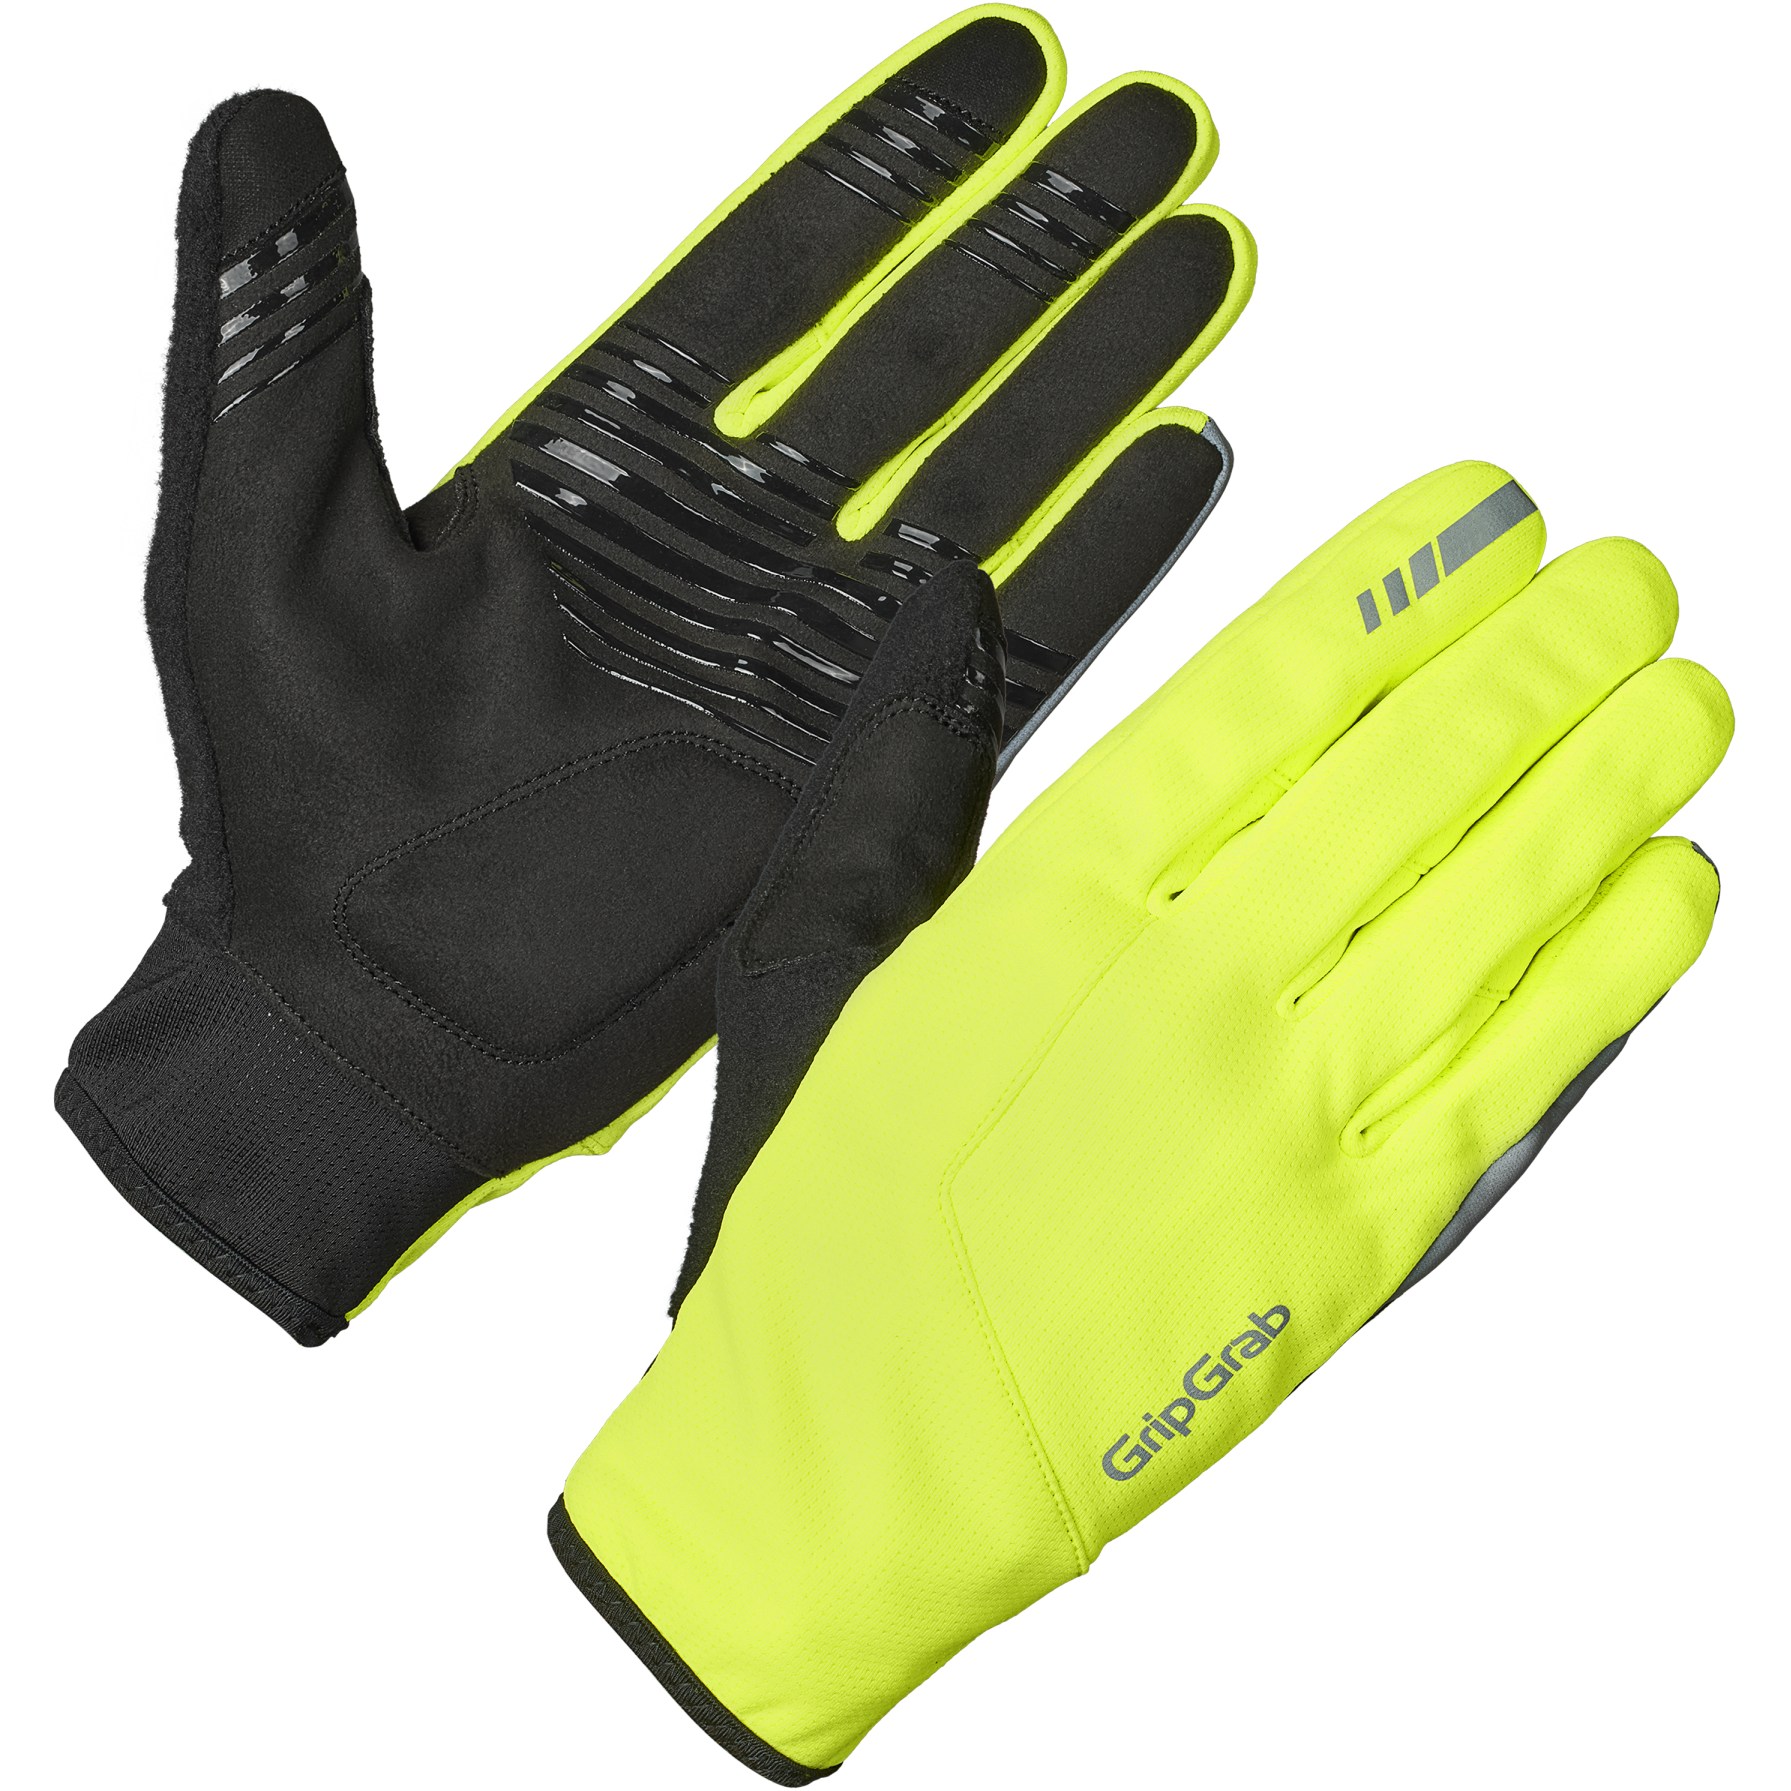 Picture of GripGrab Hurricane 2 Windproof Spring-Autumn Gloves - yellow hi-vis